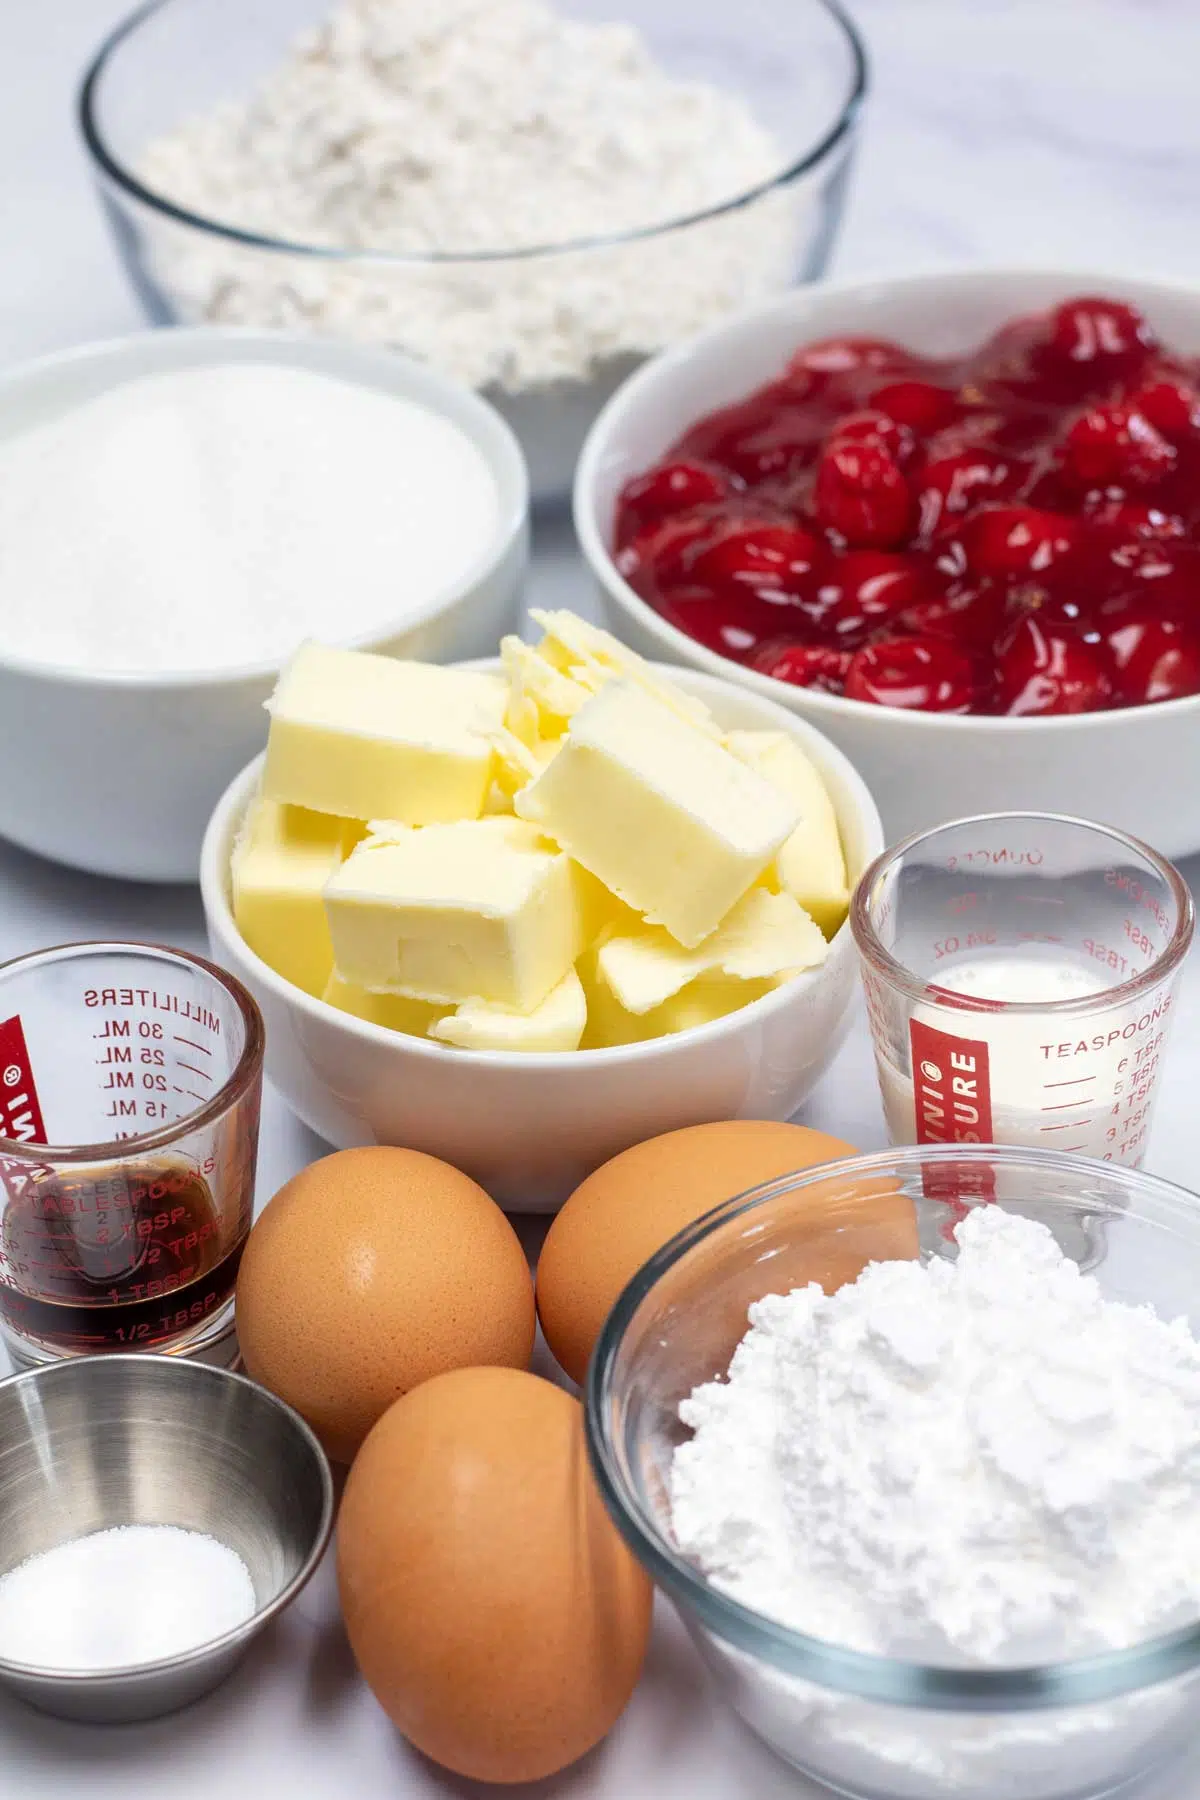 Tall image showing all the ingredients to make cherry pie bars.